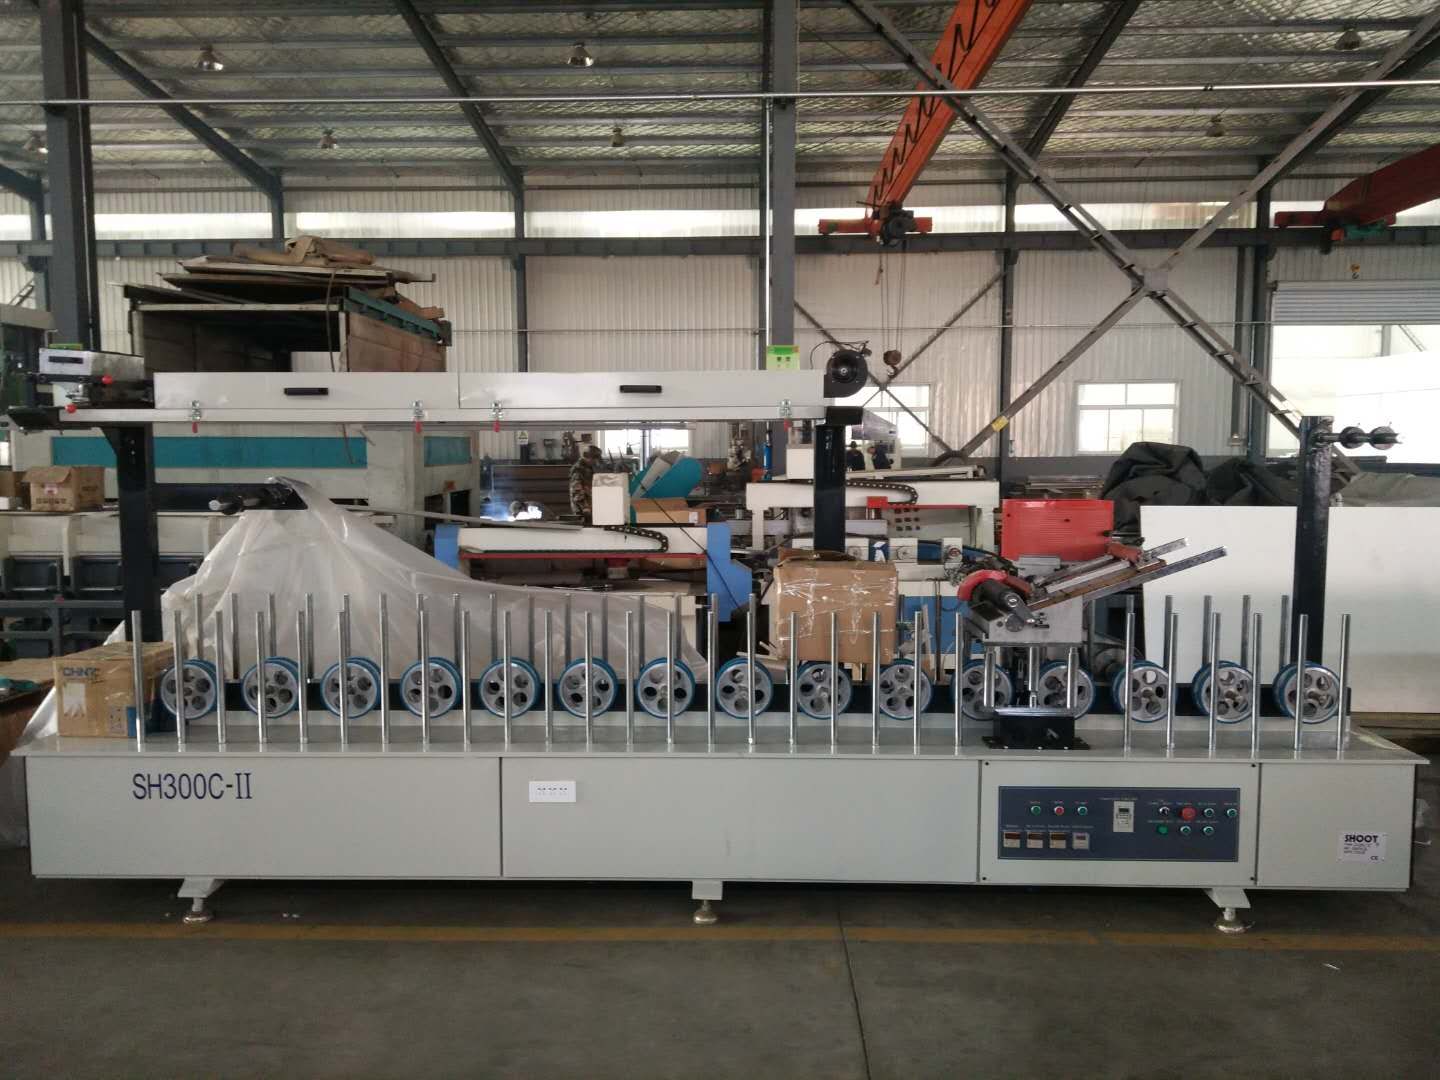 Profile Wrapping Machine (Combined Type)